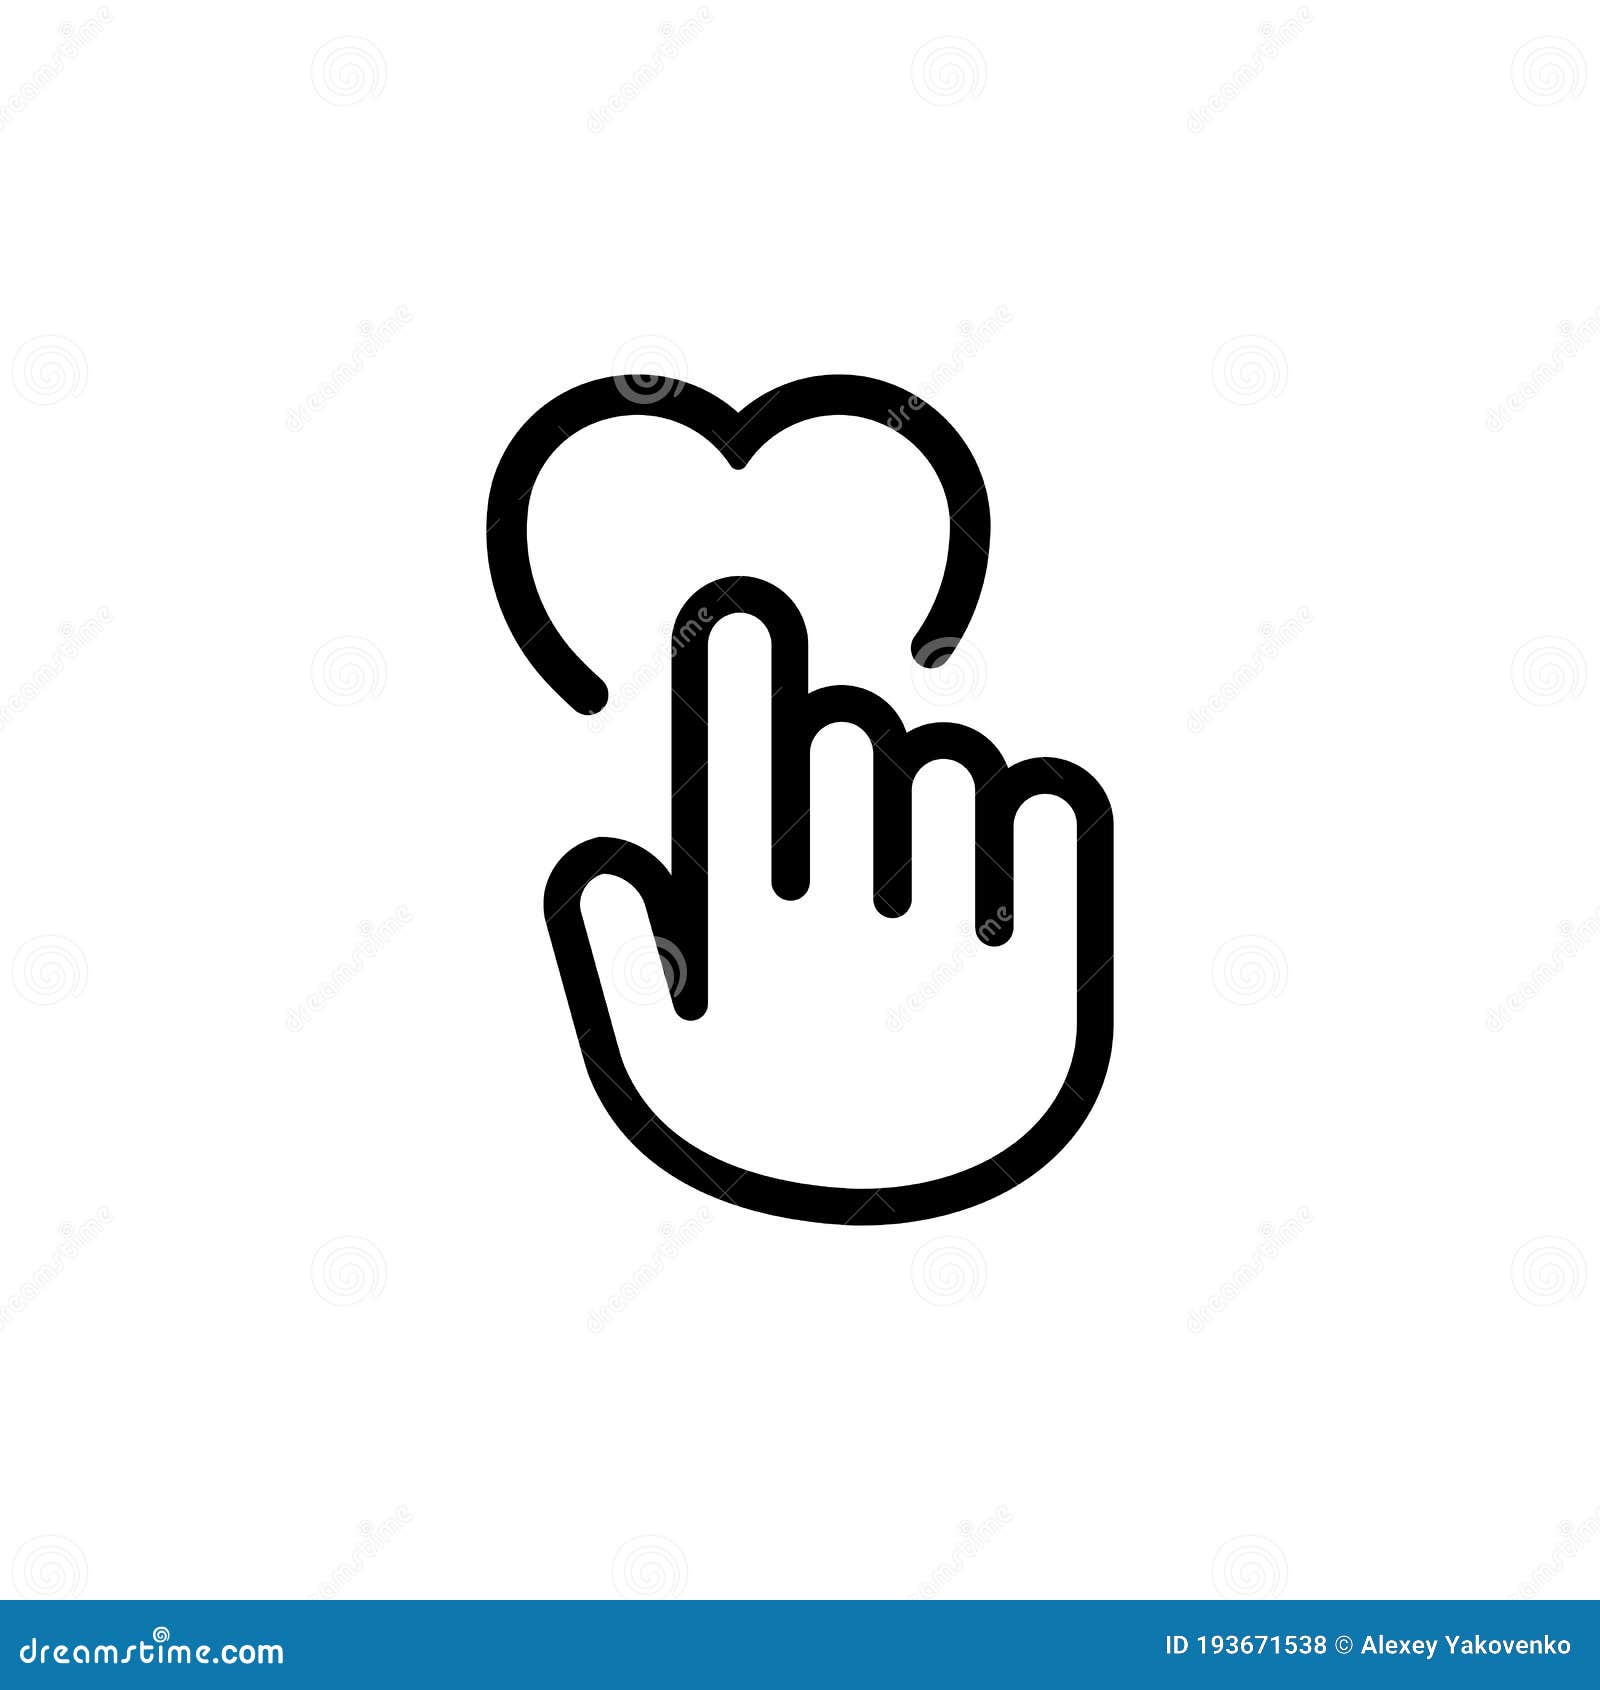 Human Hand is Pushing on Heart Icon. Love Symbol, Sign for Wedding ...